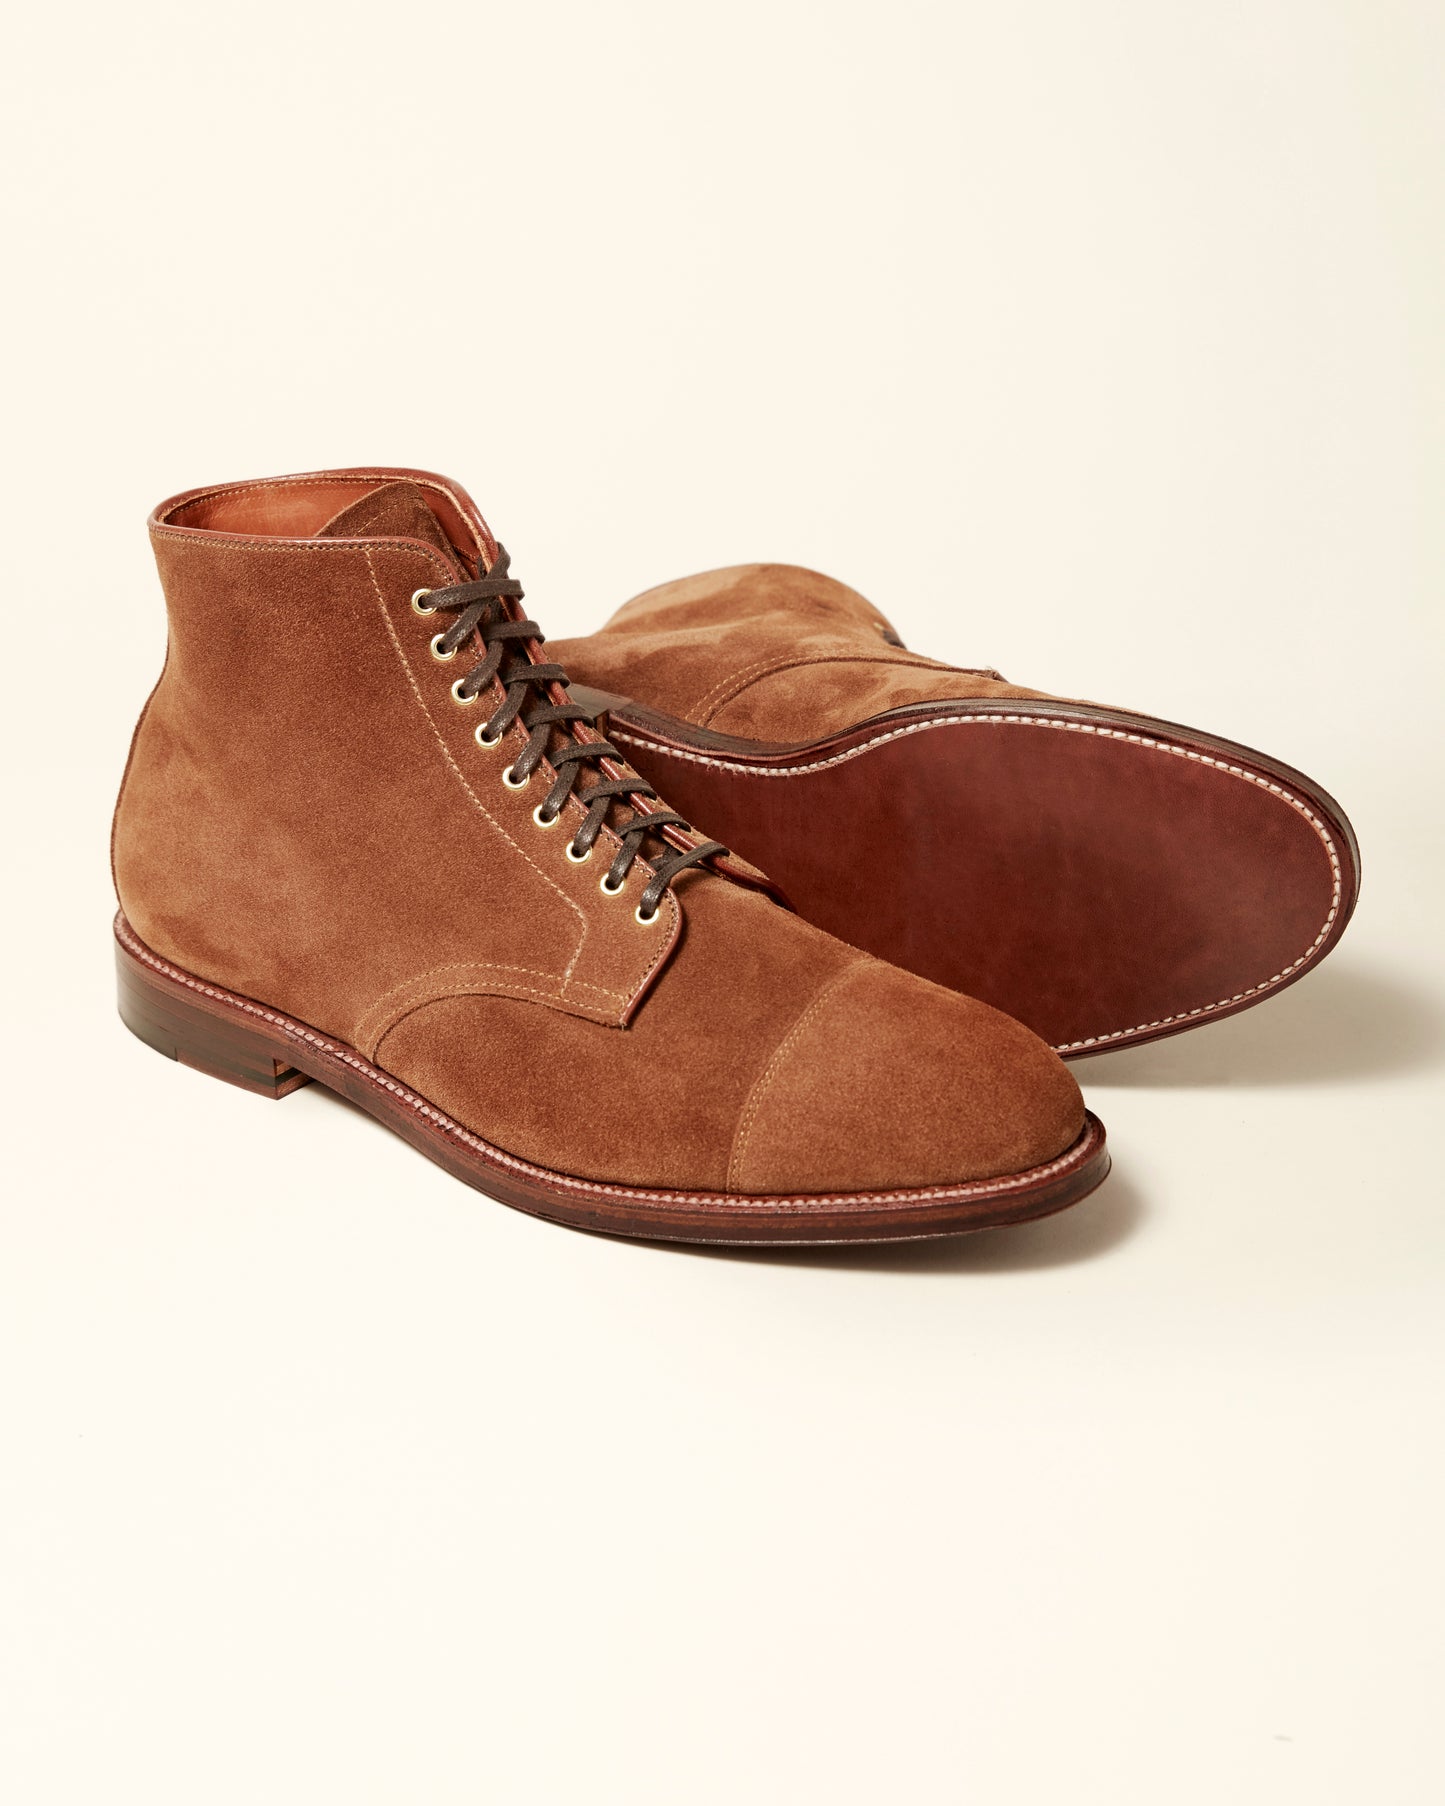 "Marvaments" Straight Tip Boot in Snuff Suede, Grant Last